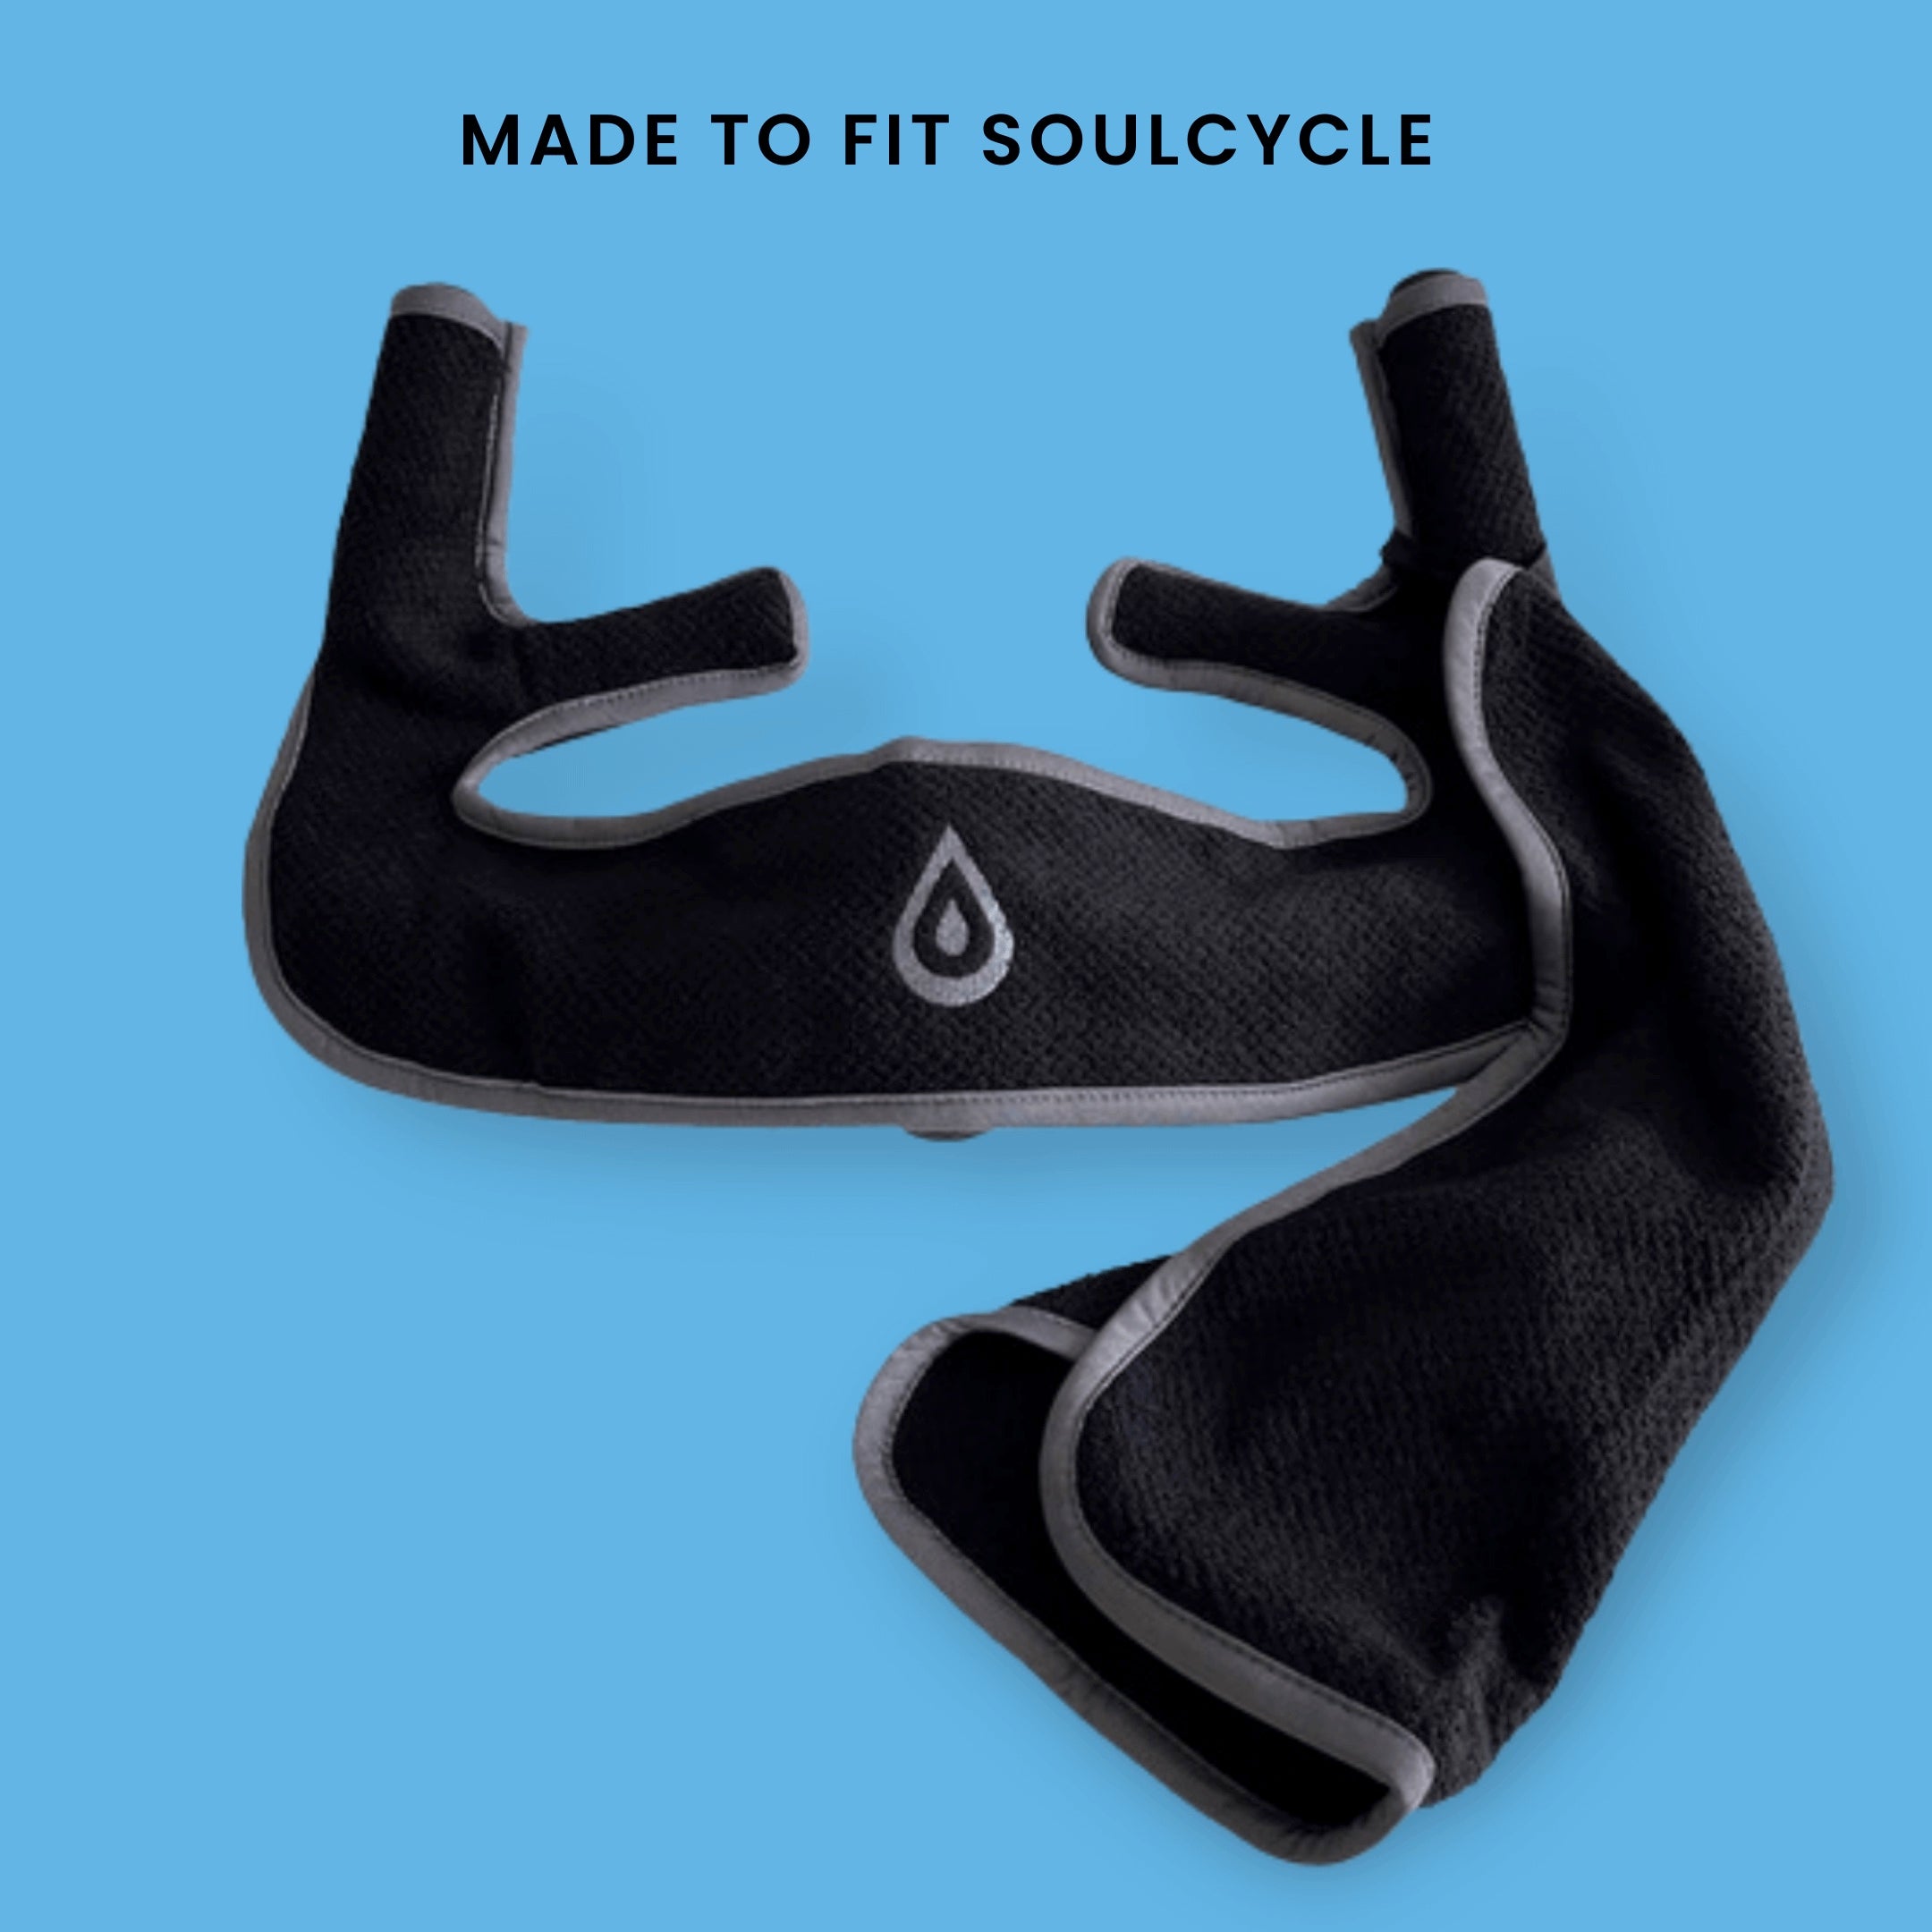 For use with SoulCycle equipment